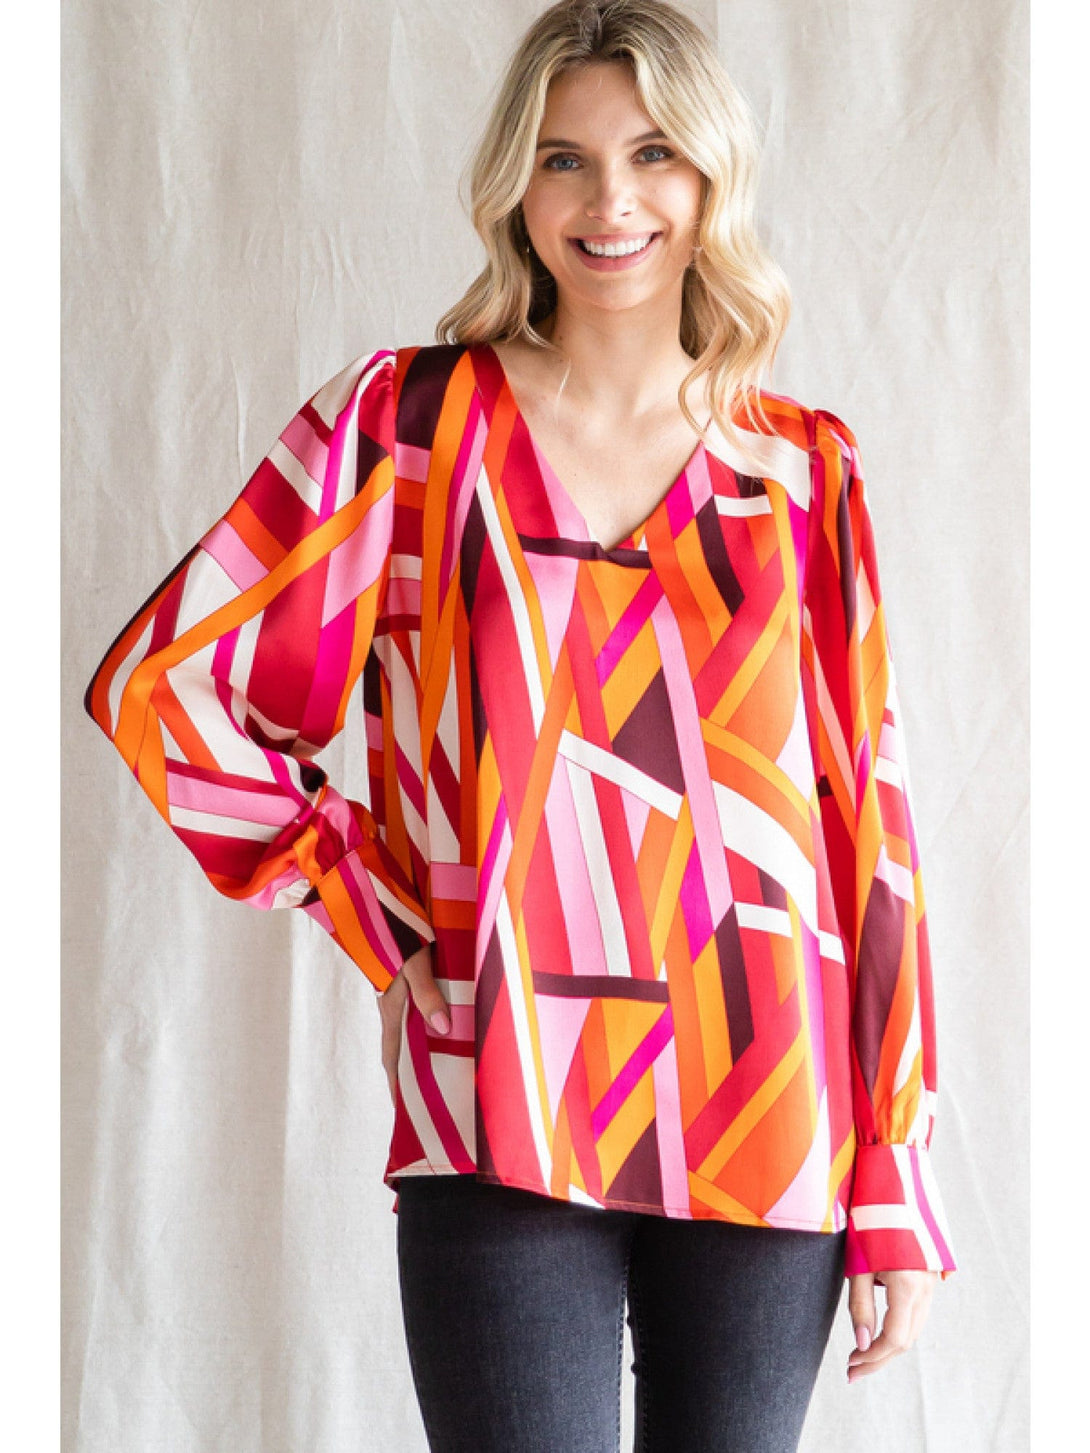 Jodifl Abstract Print Satin Top with V-Neckline and Long Bubble Sleeves